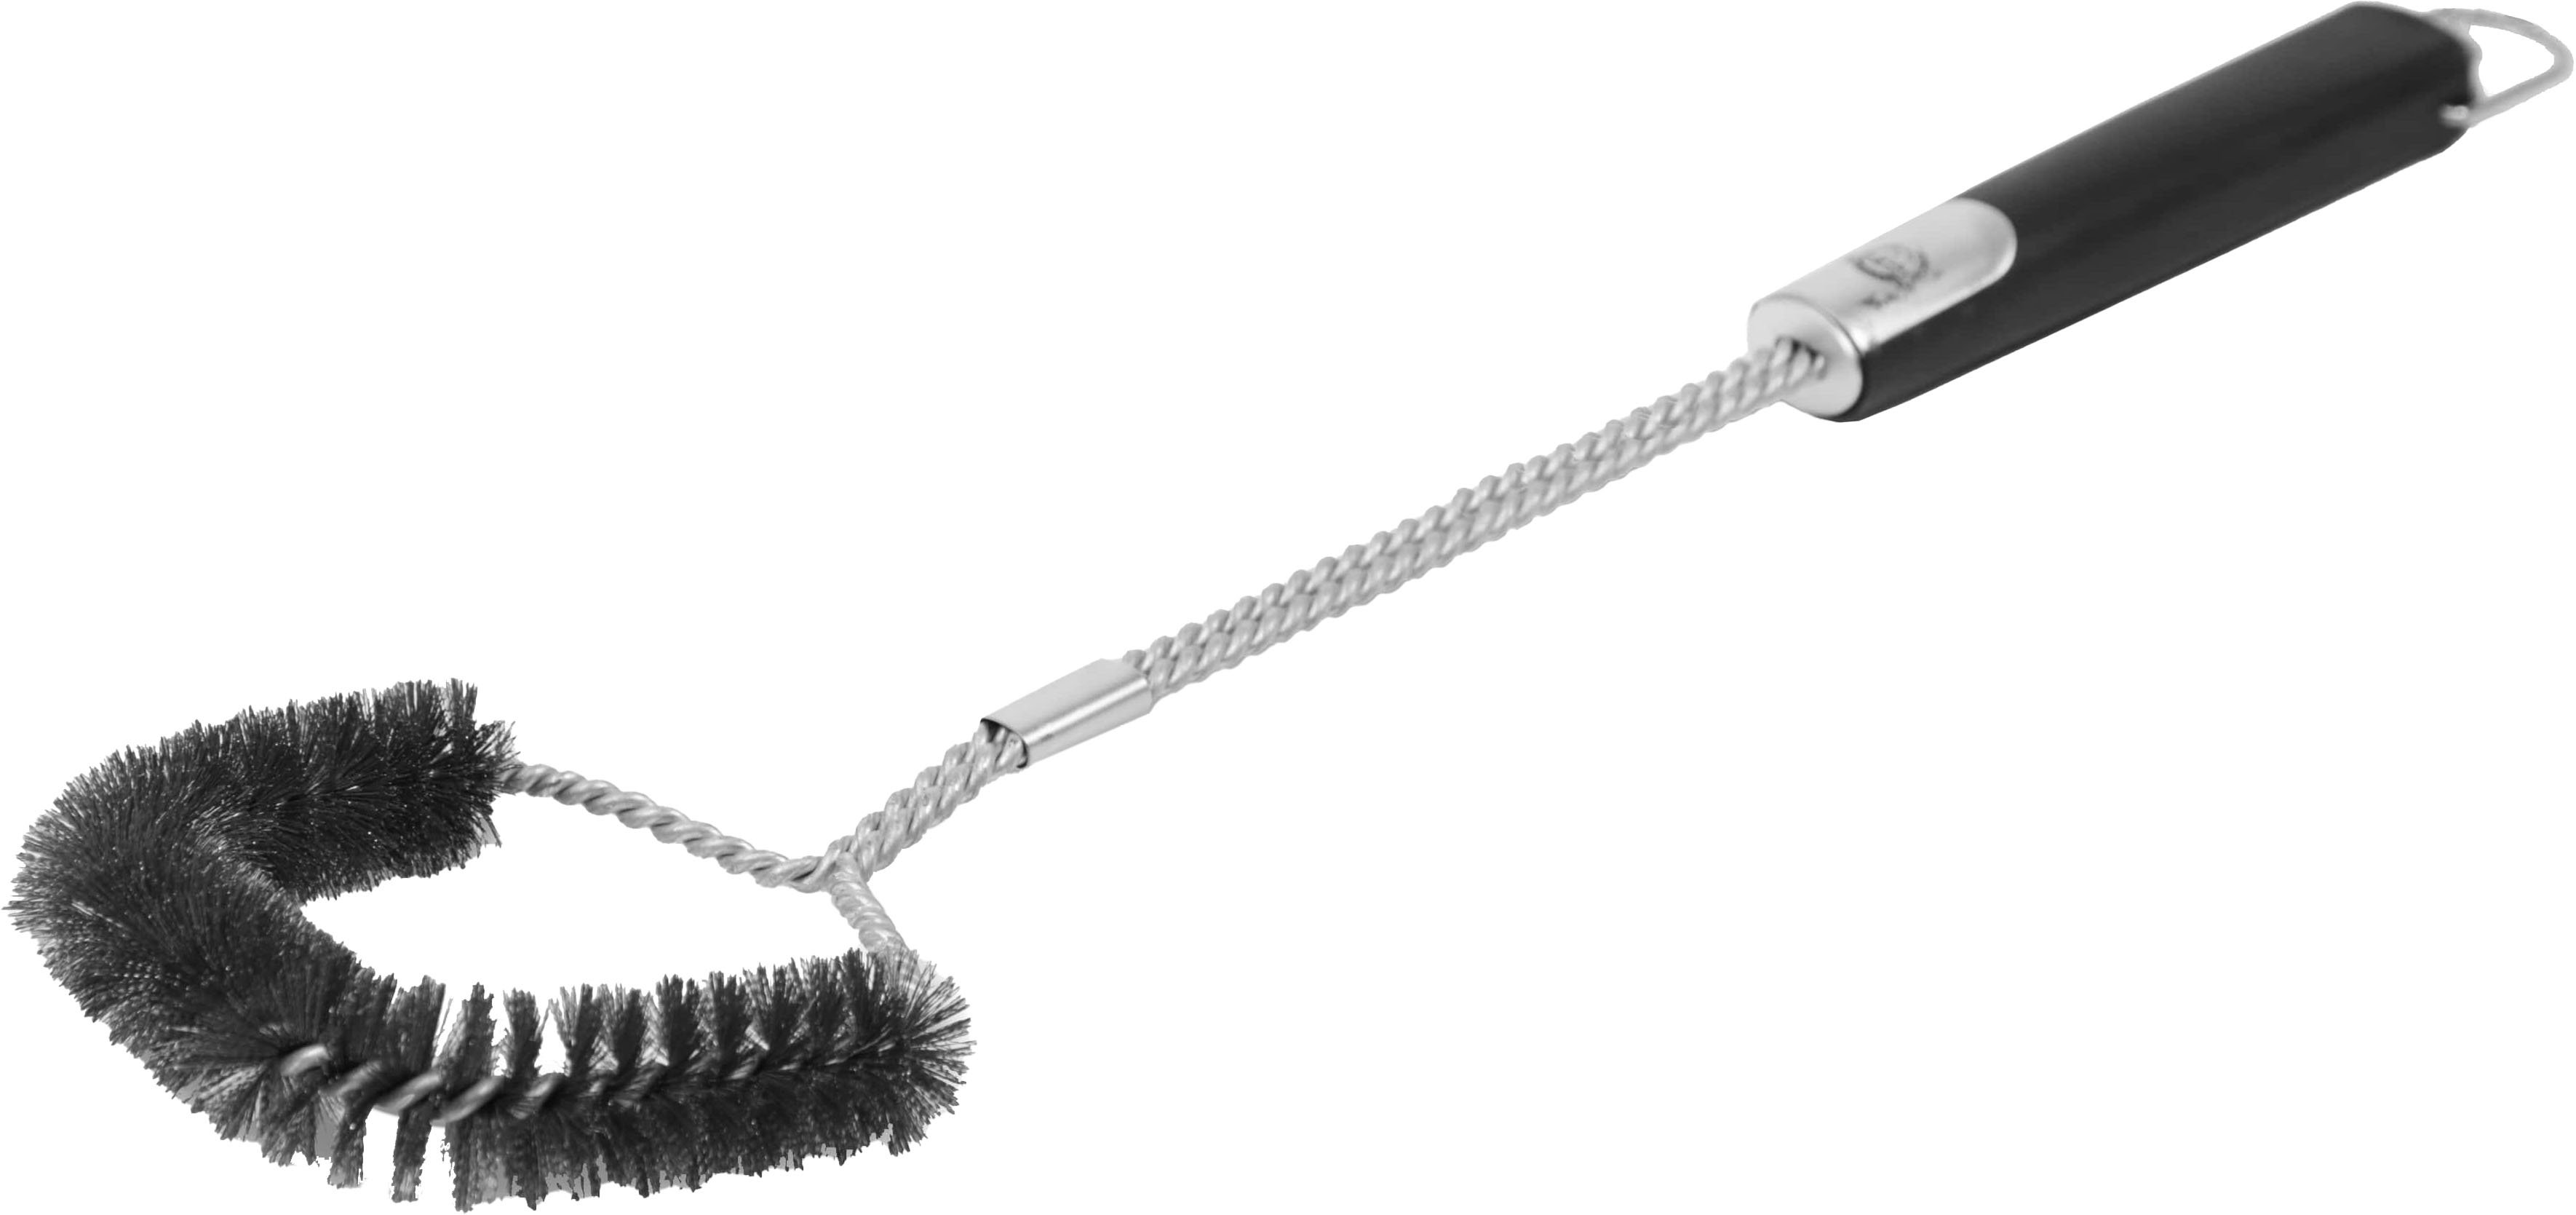 Weber 12 in. 3 Sided Grill Brush 6277 - The Home Depot